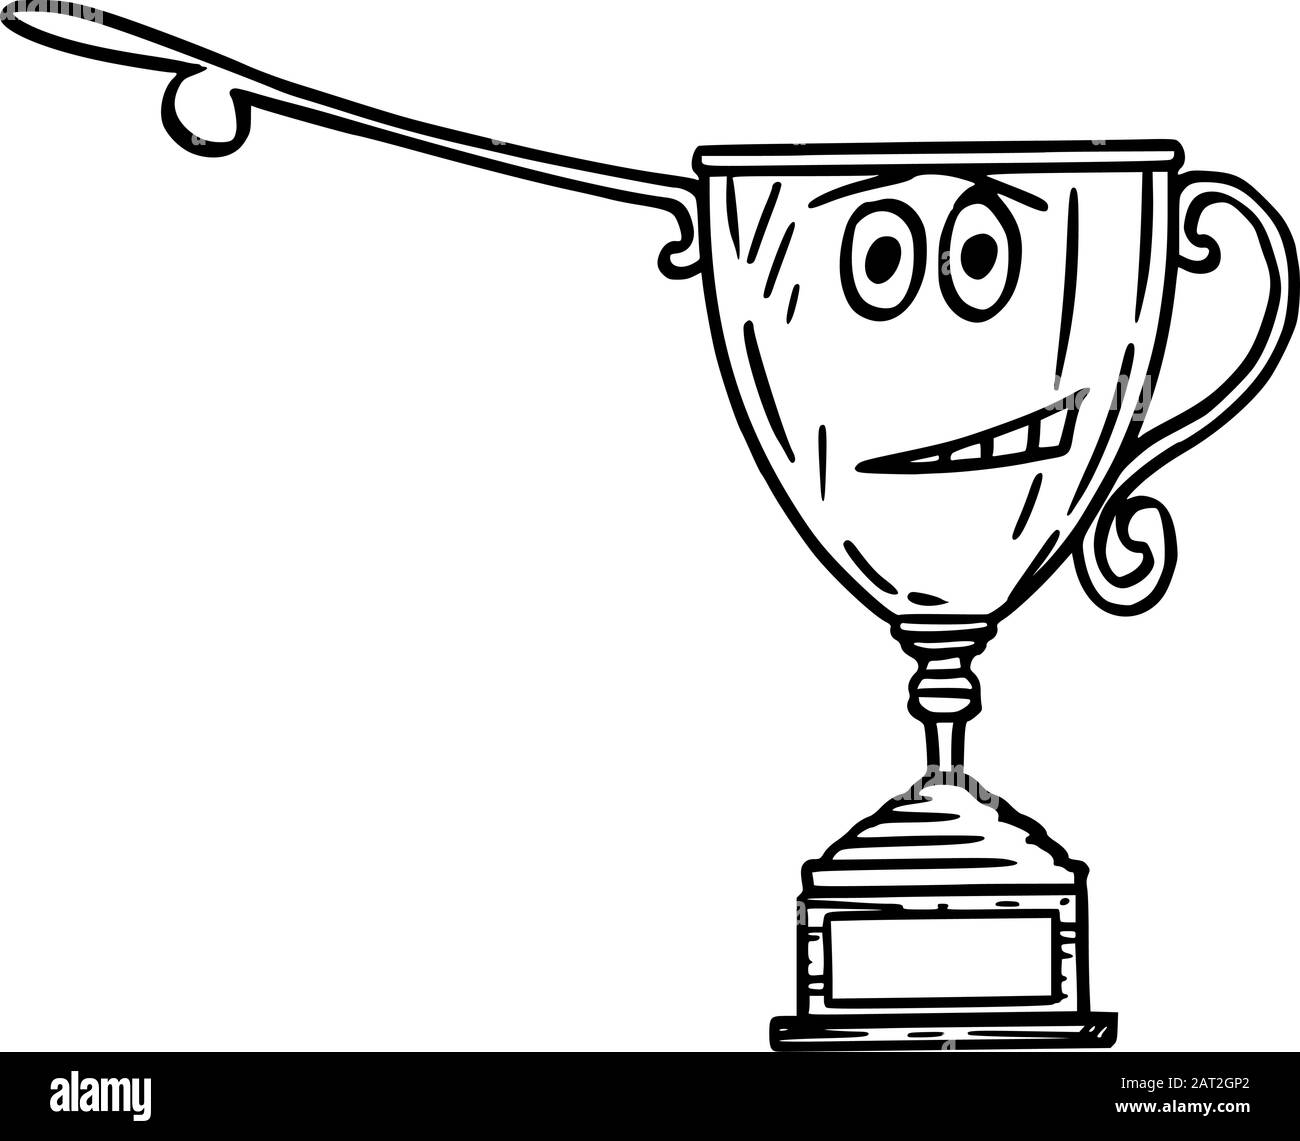 Vector illustration of cartoon winners trophy cup character showing or pointing at something by hand.Sport or business advertisement or marketing design. Stock Vector